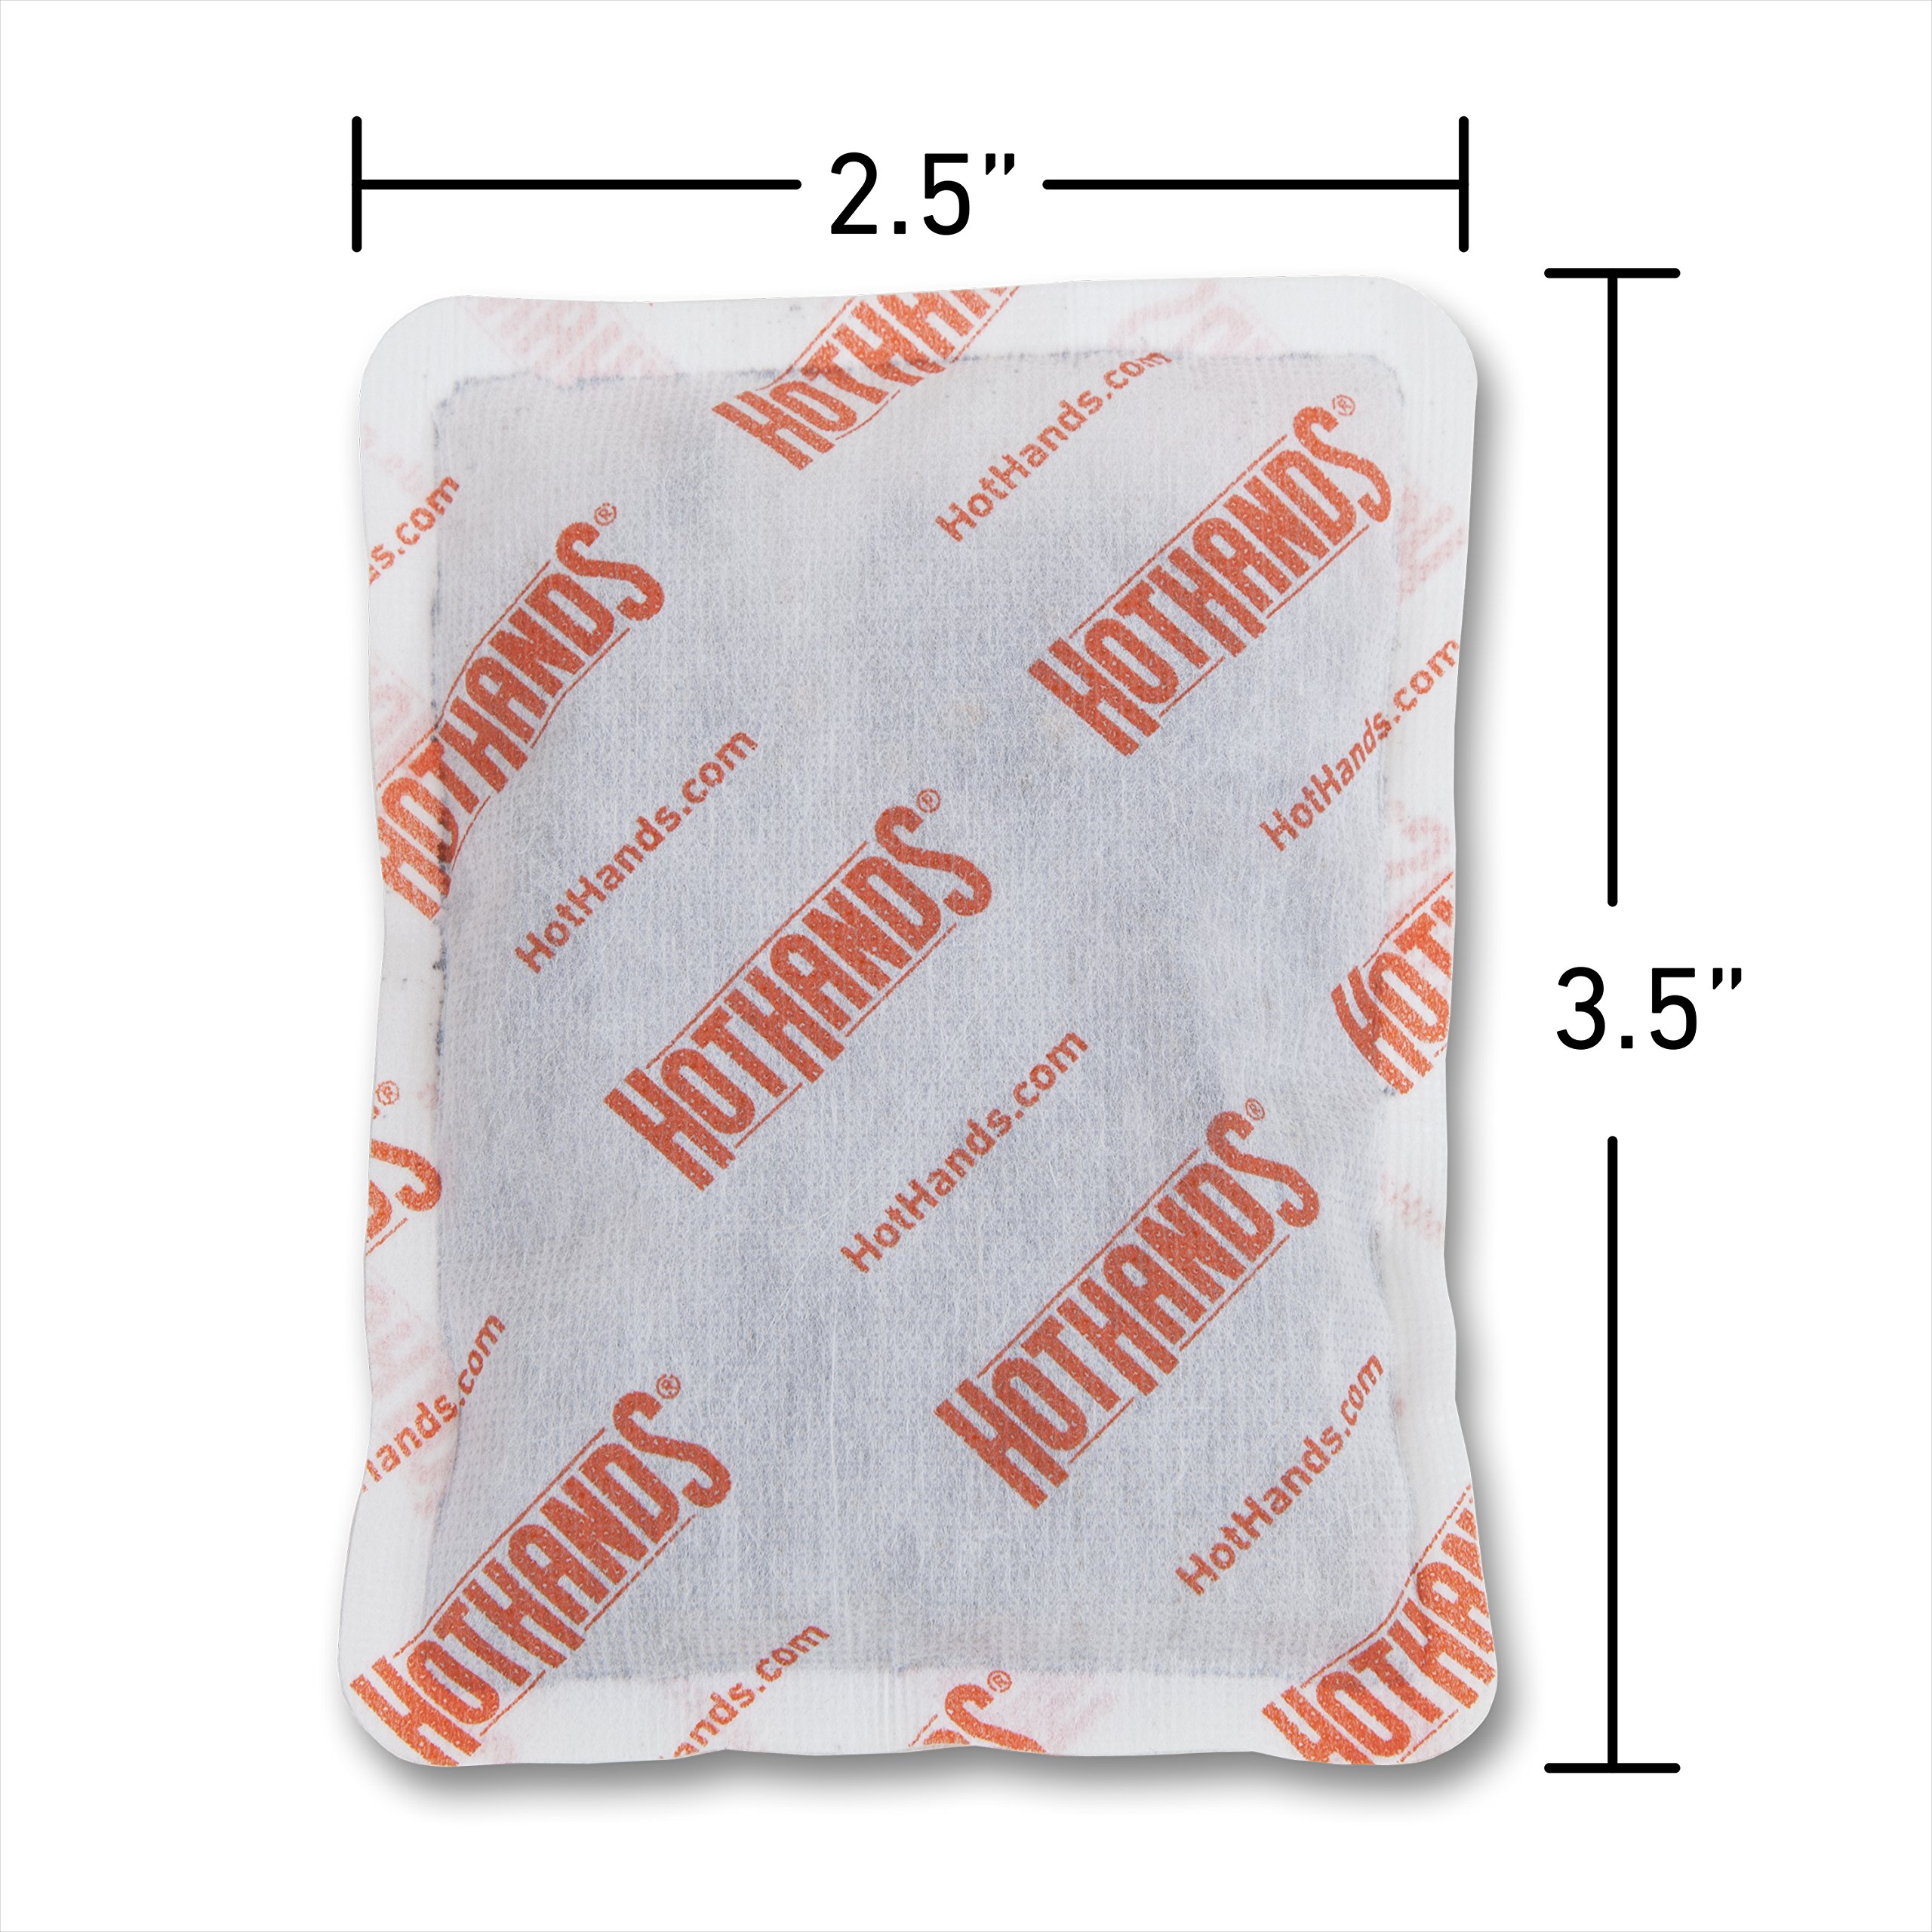 HotHands Body & Hand Super Warmers - Long Lasting Safe Natural Odorless Air Activated Warmers - Up to 18 Hours of Heat - 40 Individual Warmers